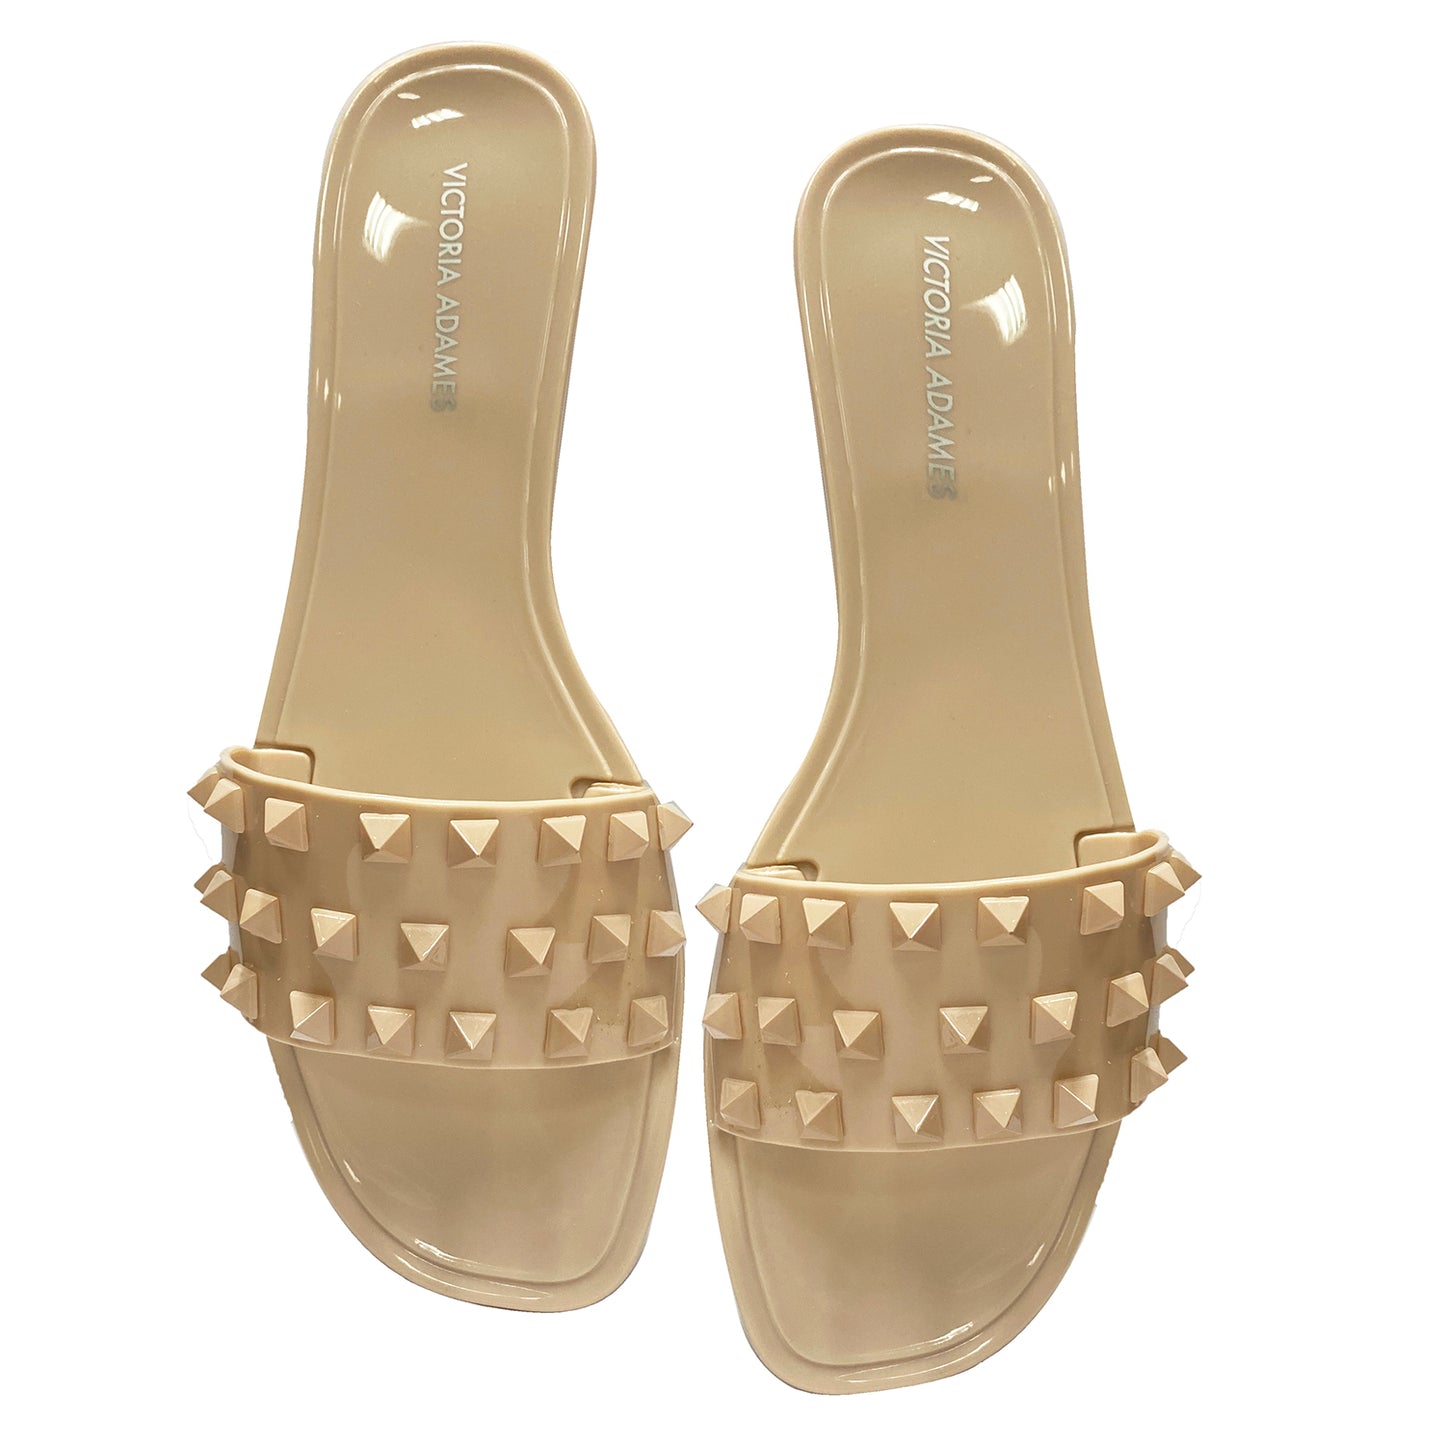 Victoria Adames Spring Jelly Sandals Nude